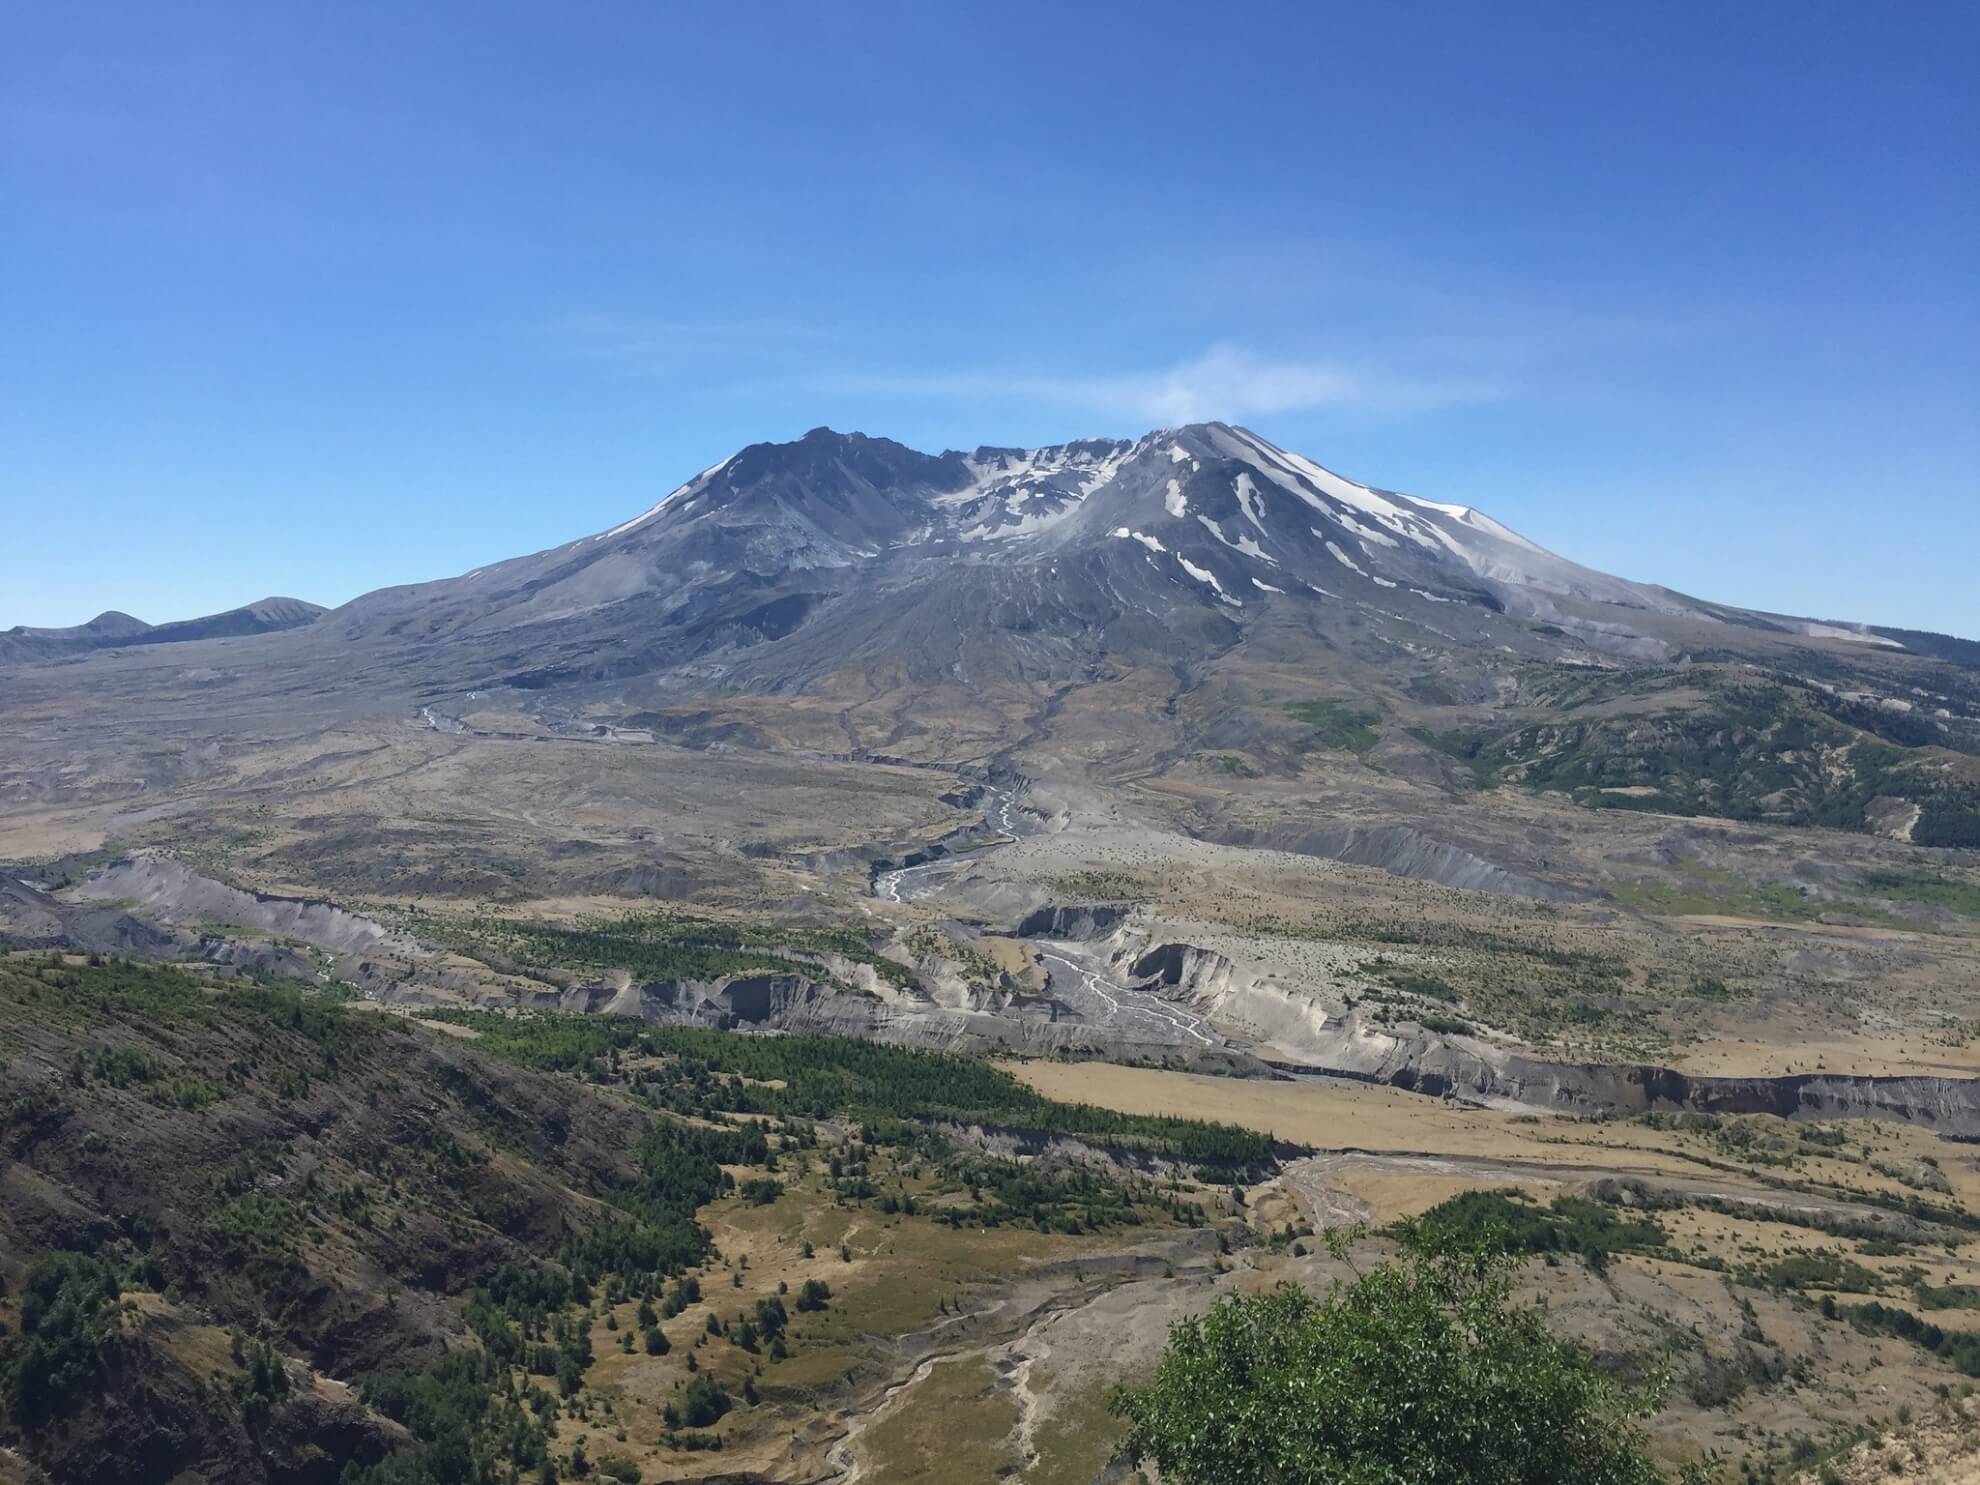 Landscape view of Mount St Helens peak and crater